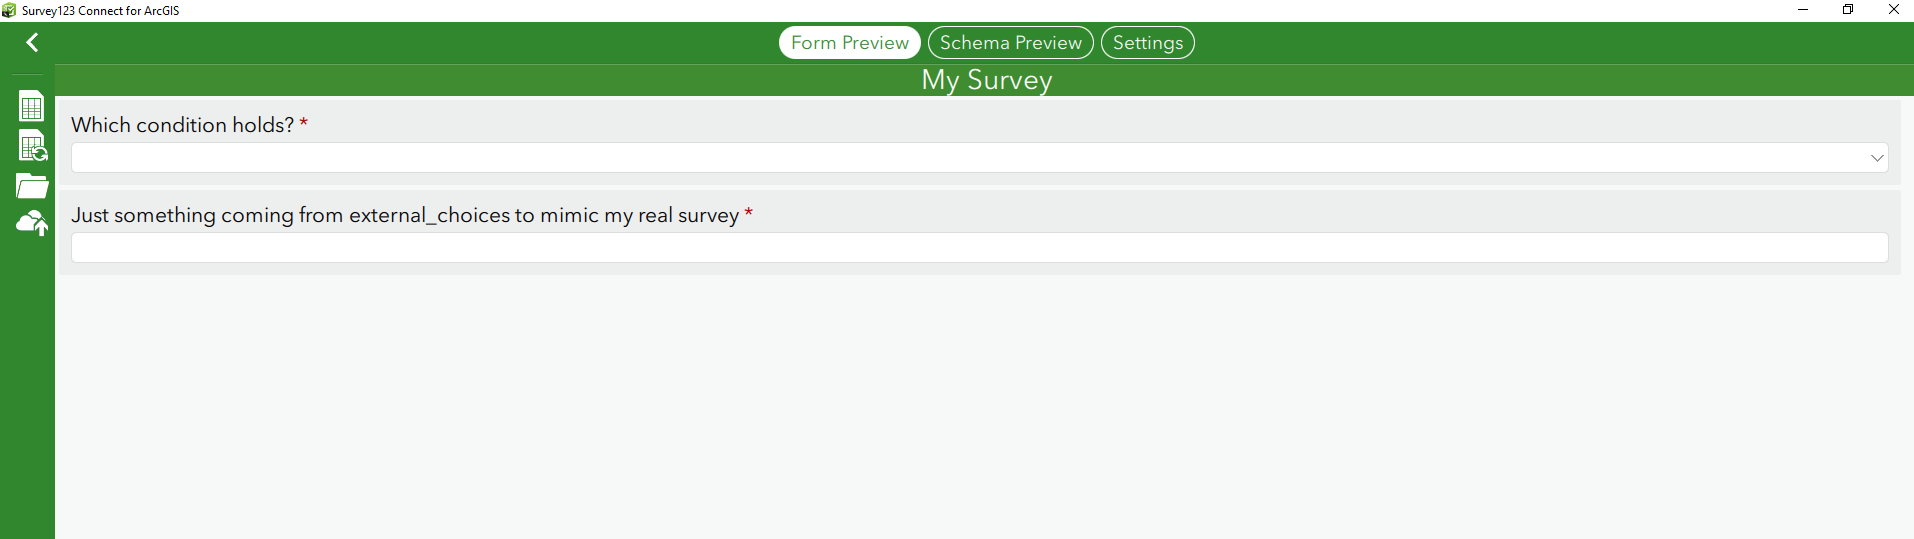 How the survey looks like in the beginning